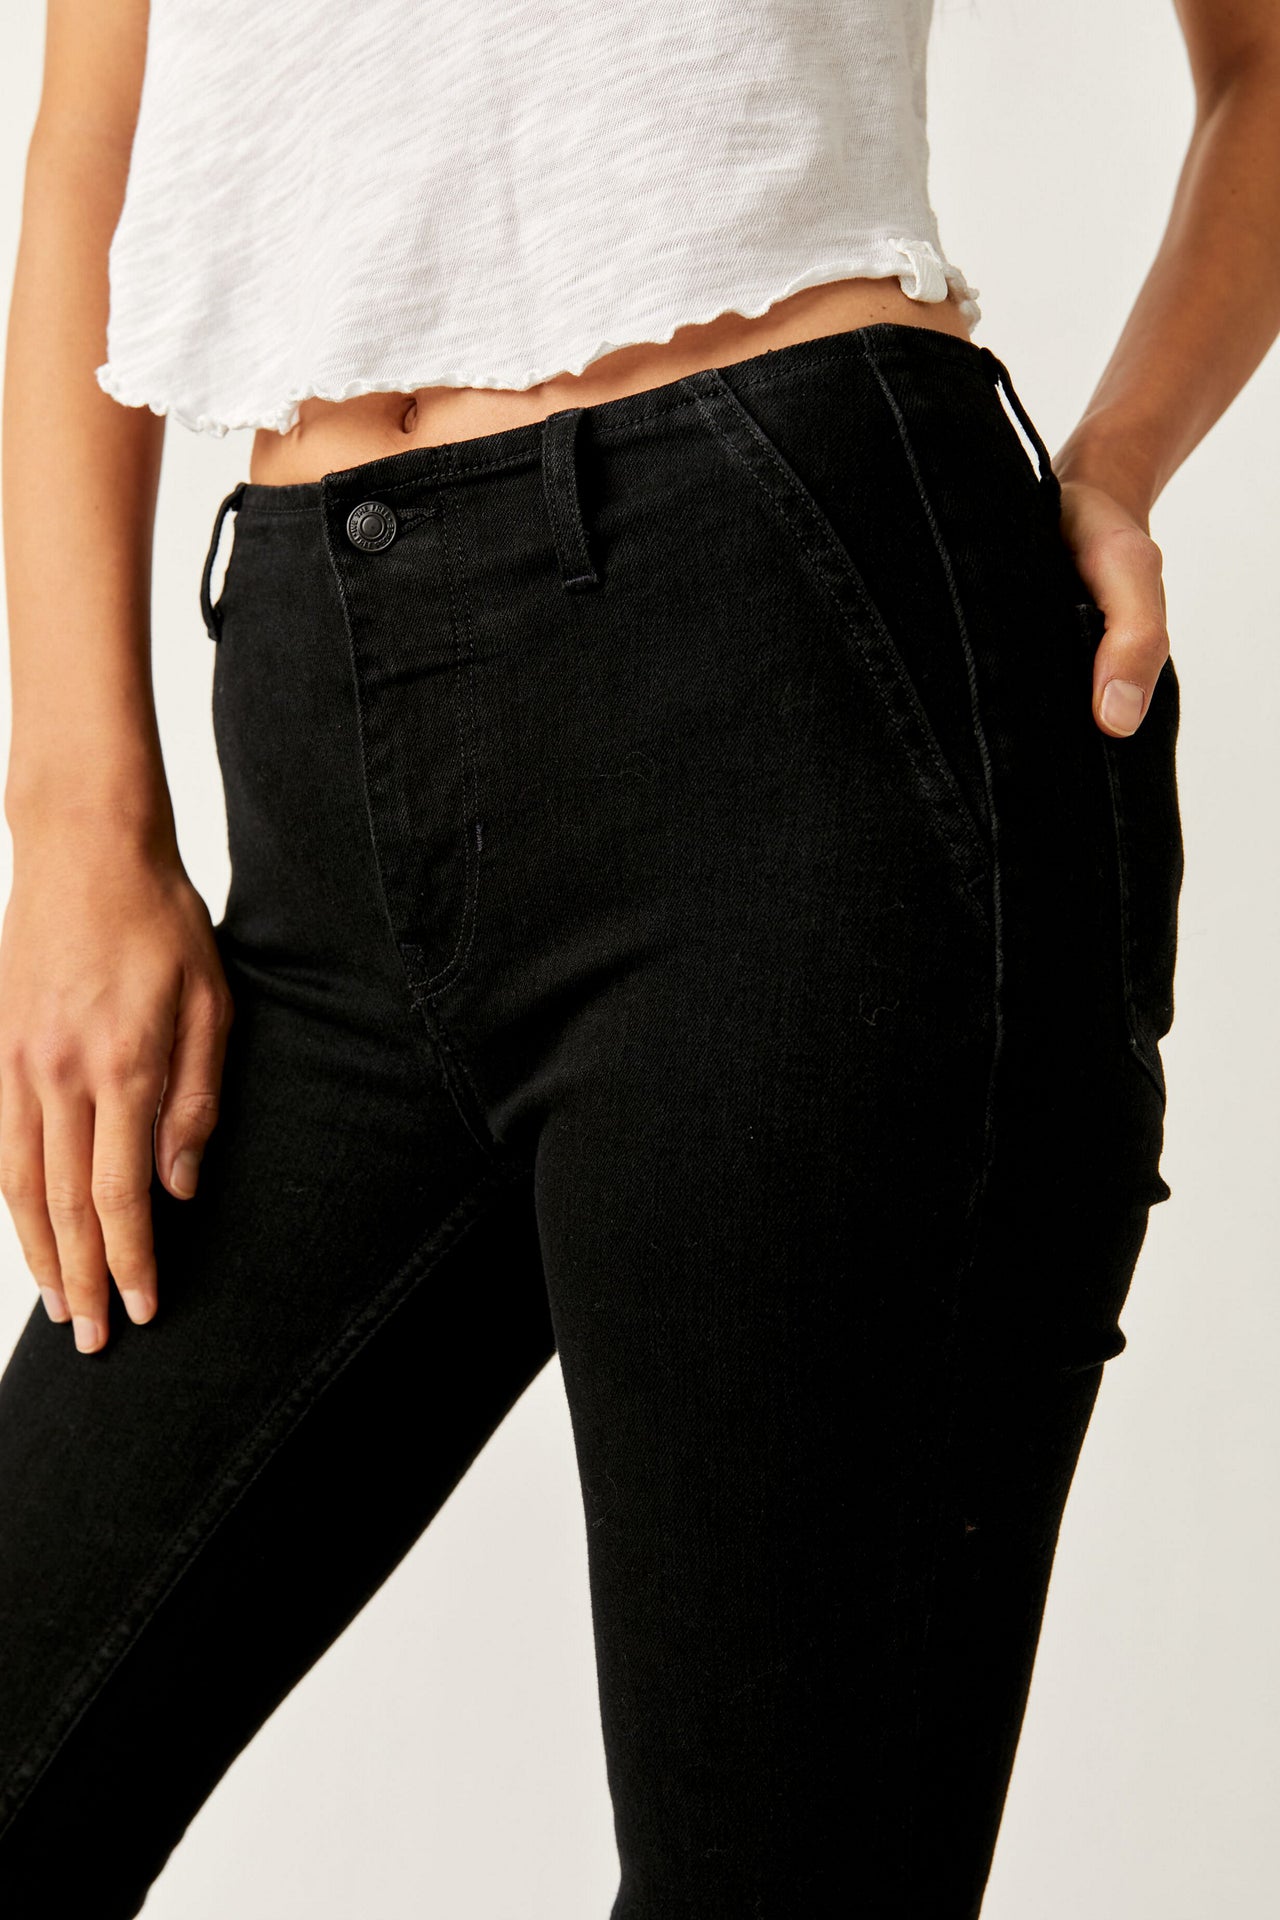 Level Up Slit Bootcut Pitch Black, Bootcut Denim by Free People | LIT Boutique